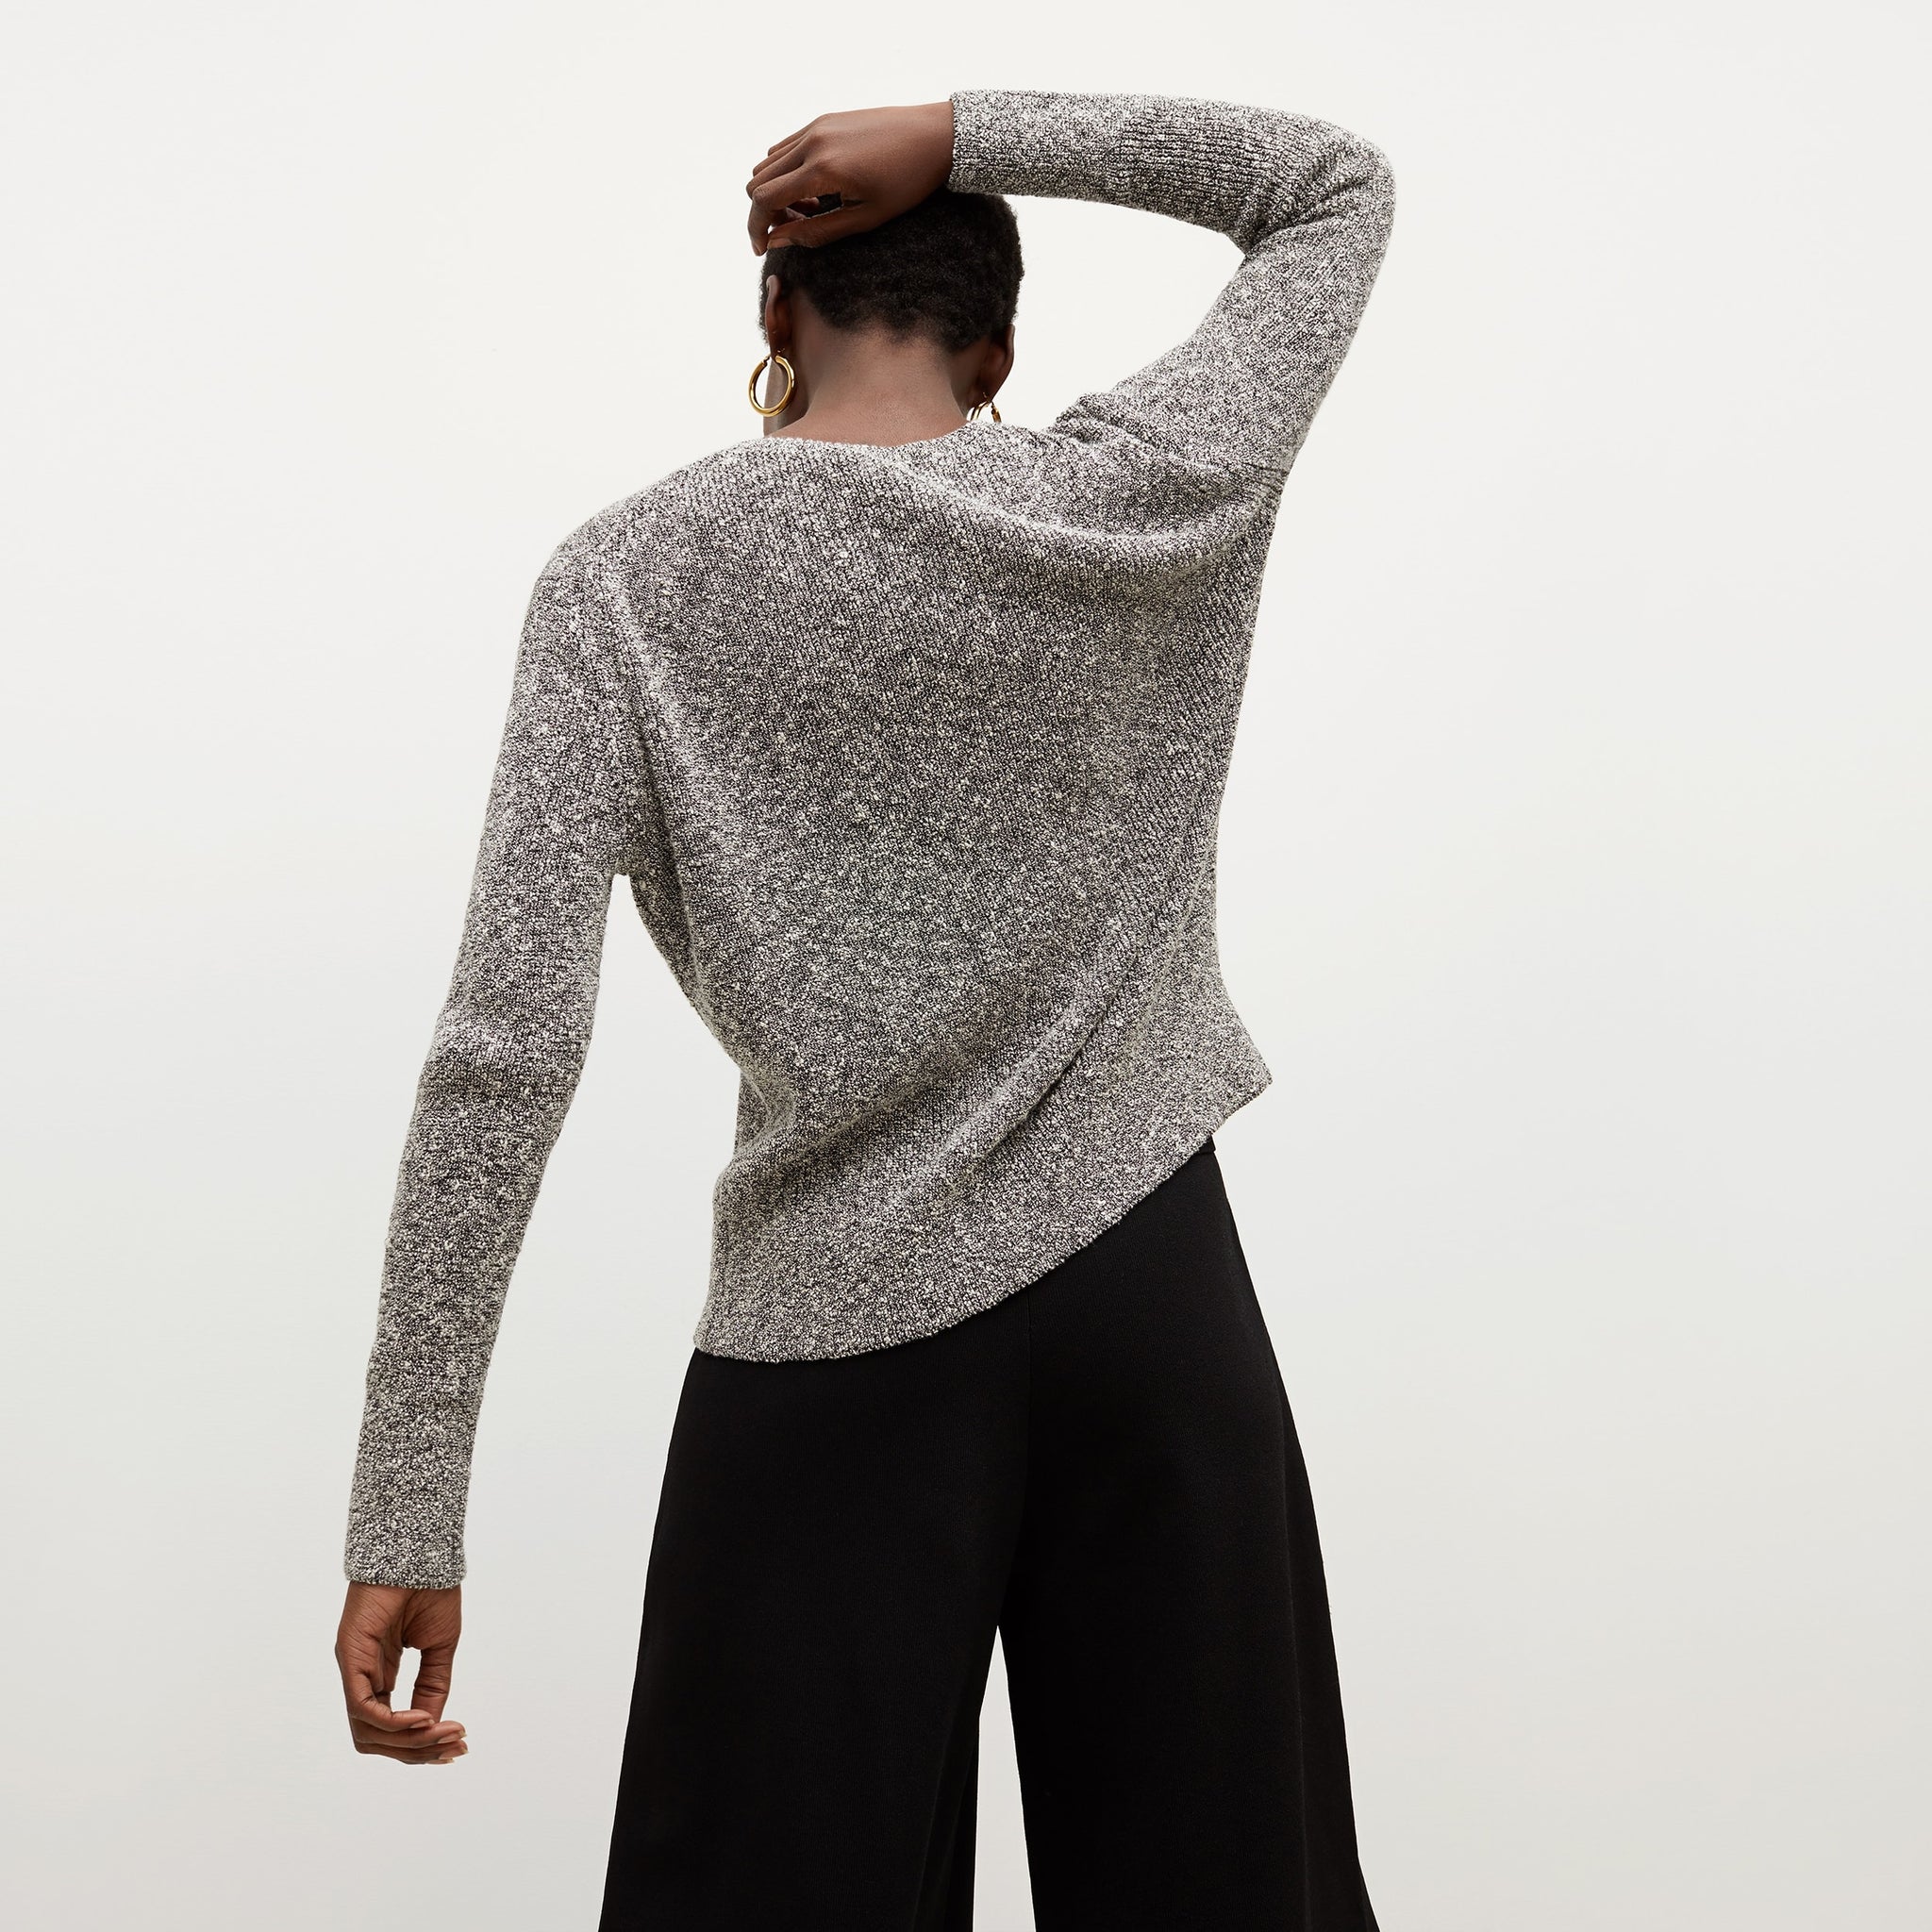 Back image of a woman standing wearing the Butler Sweater—Knit Boucle in Black / White